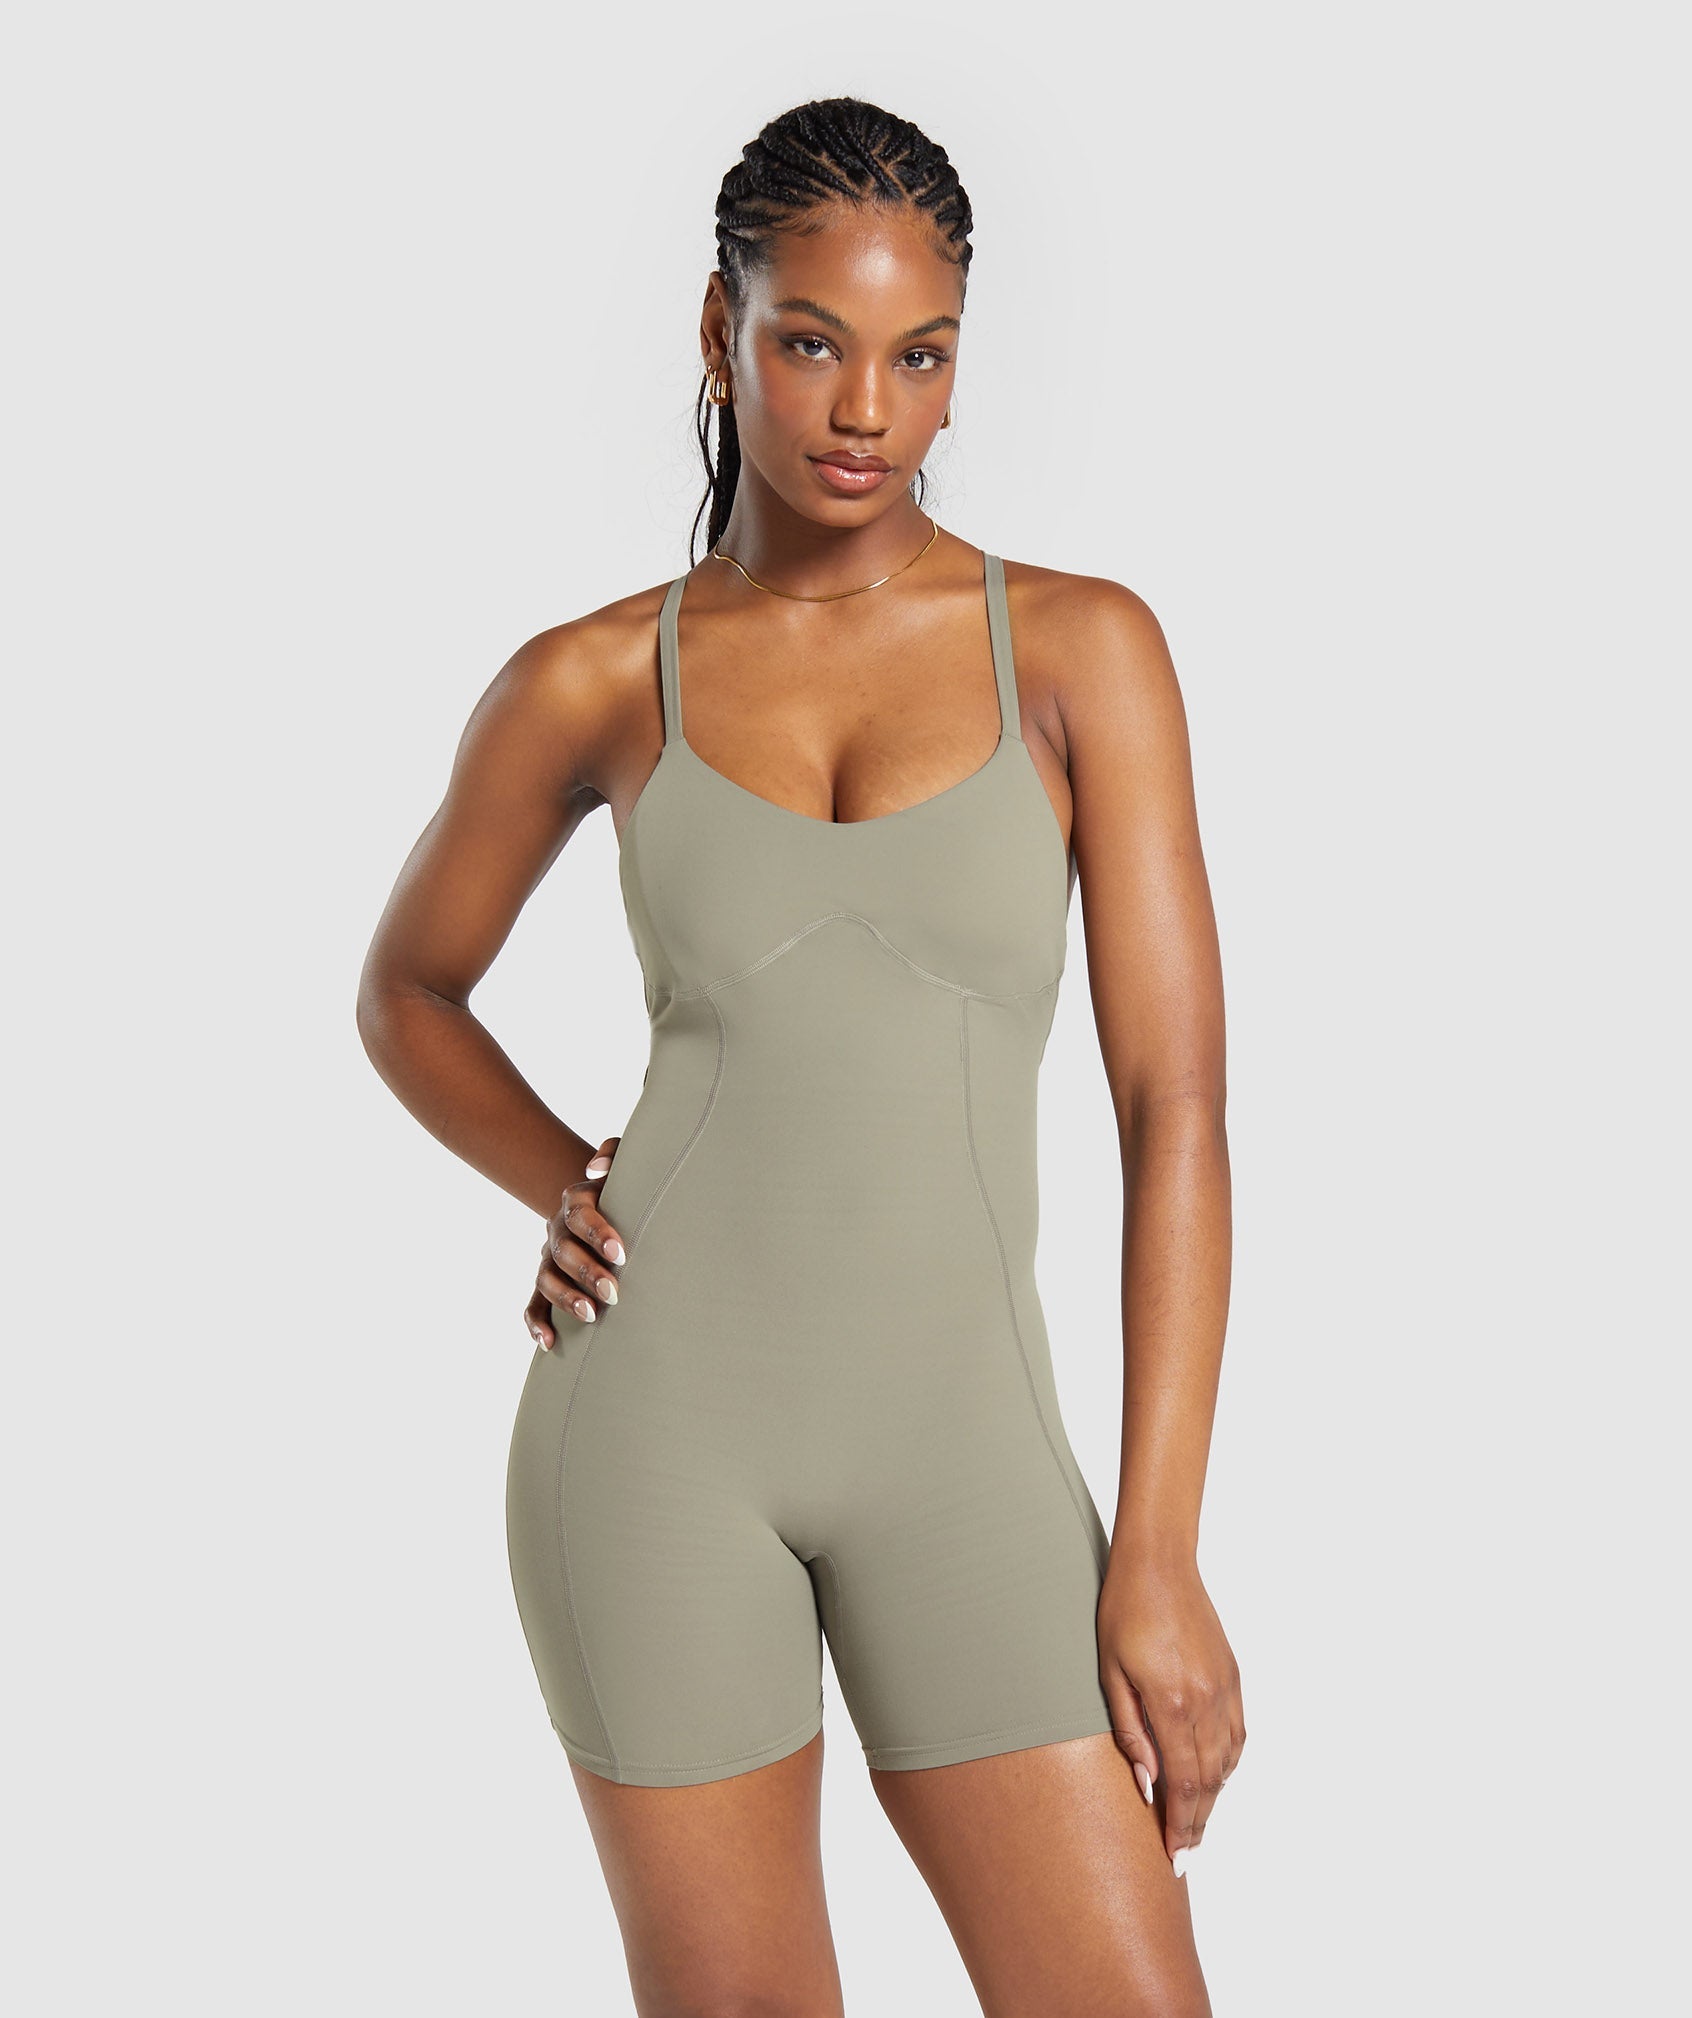 Overalls for Women Petite Womens Crew Neck Long Sleeve Bodysuit Comfortable  Against The Skin Tops Sexy Body Suits Women Beige at  Women's  Clothing store